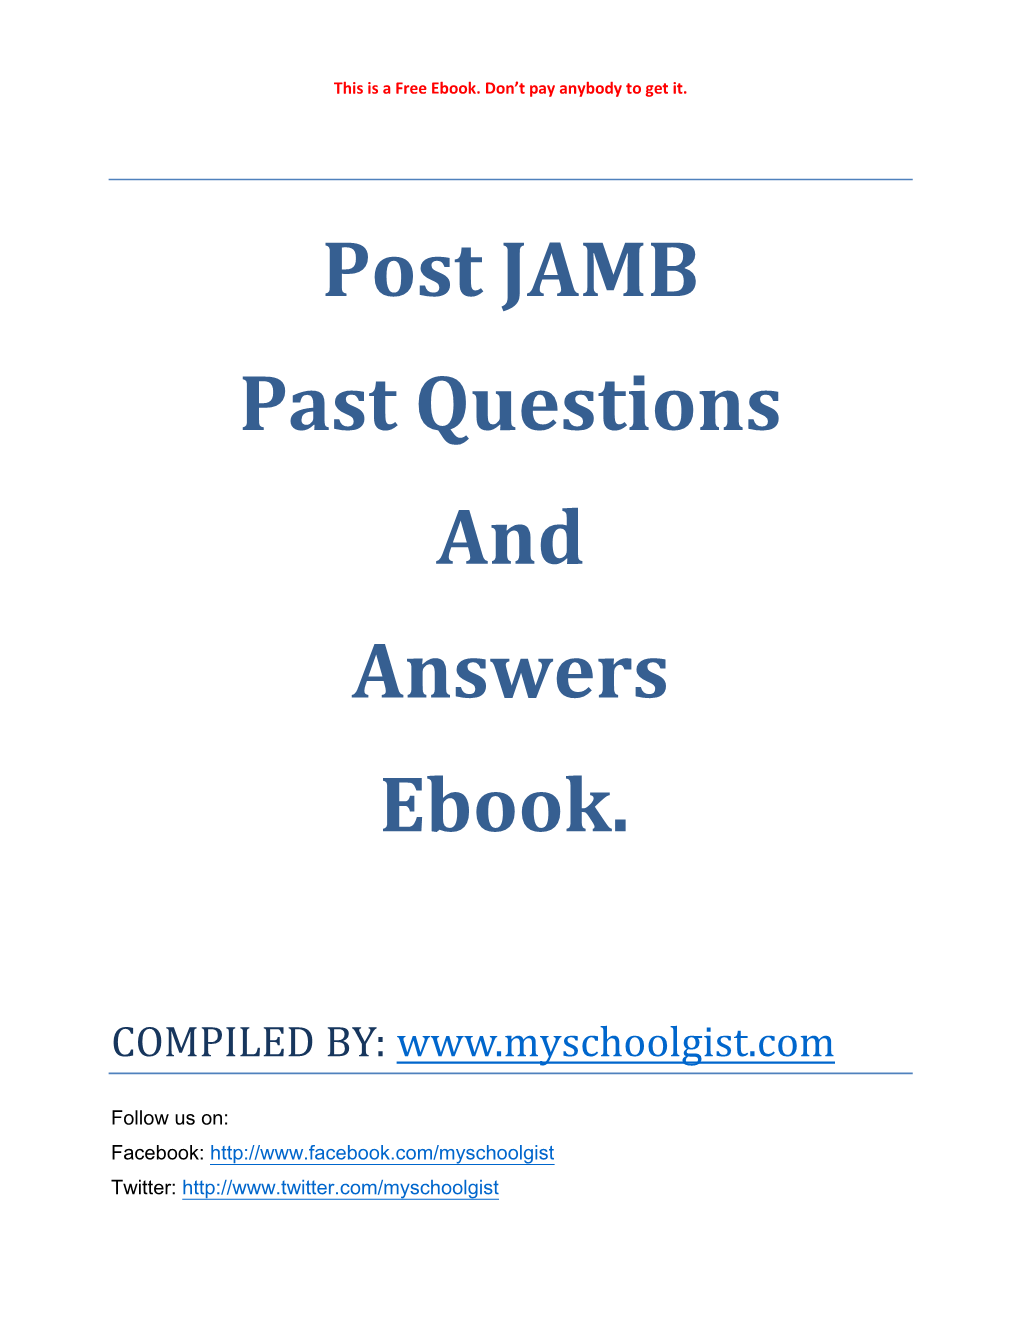 Post JAMB Past Questions and Answers Ebook